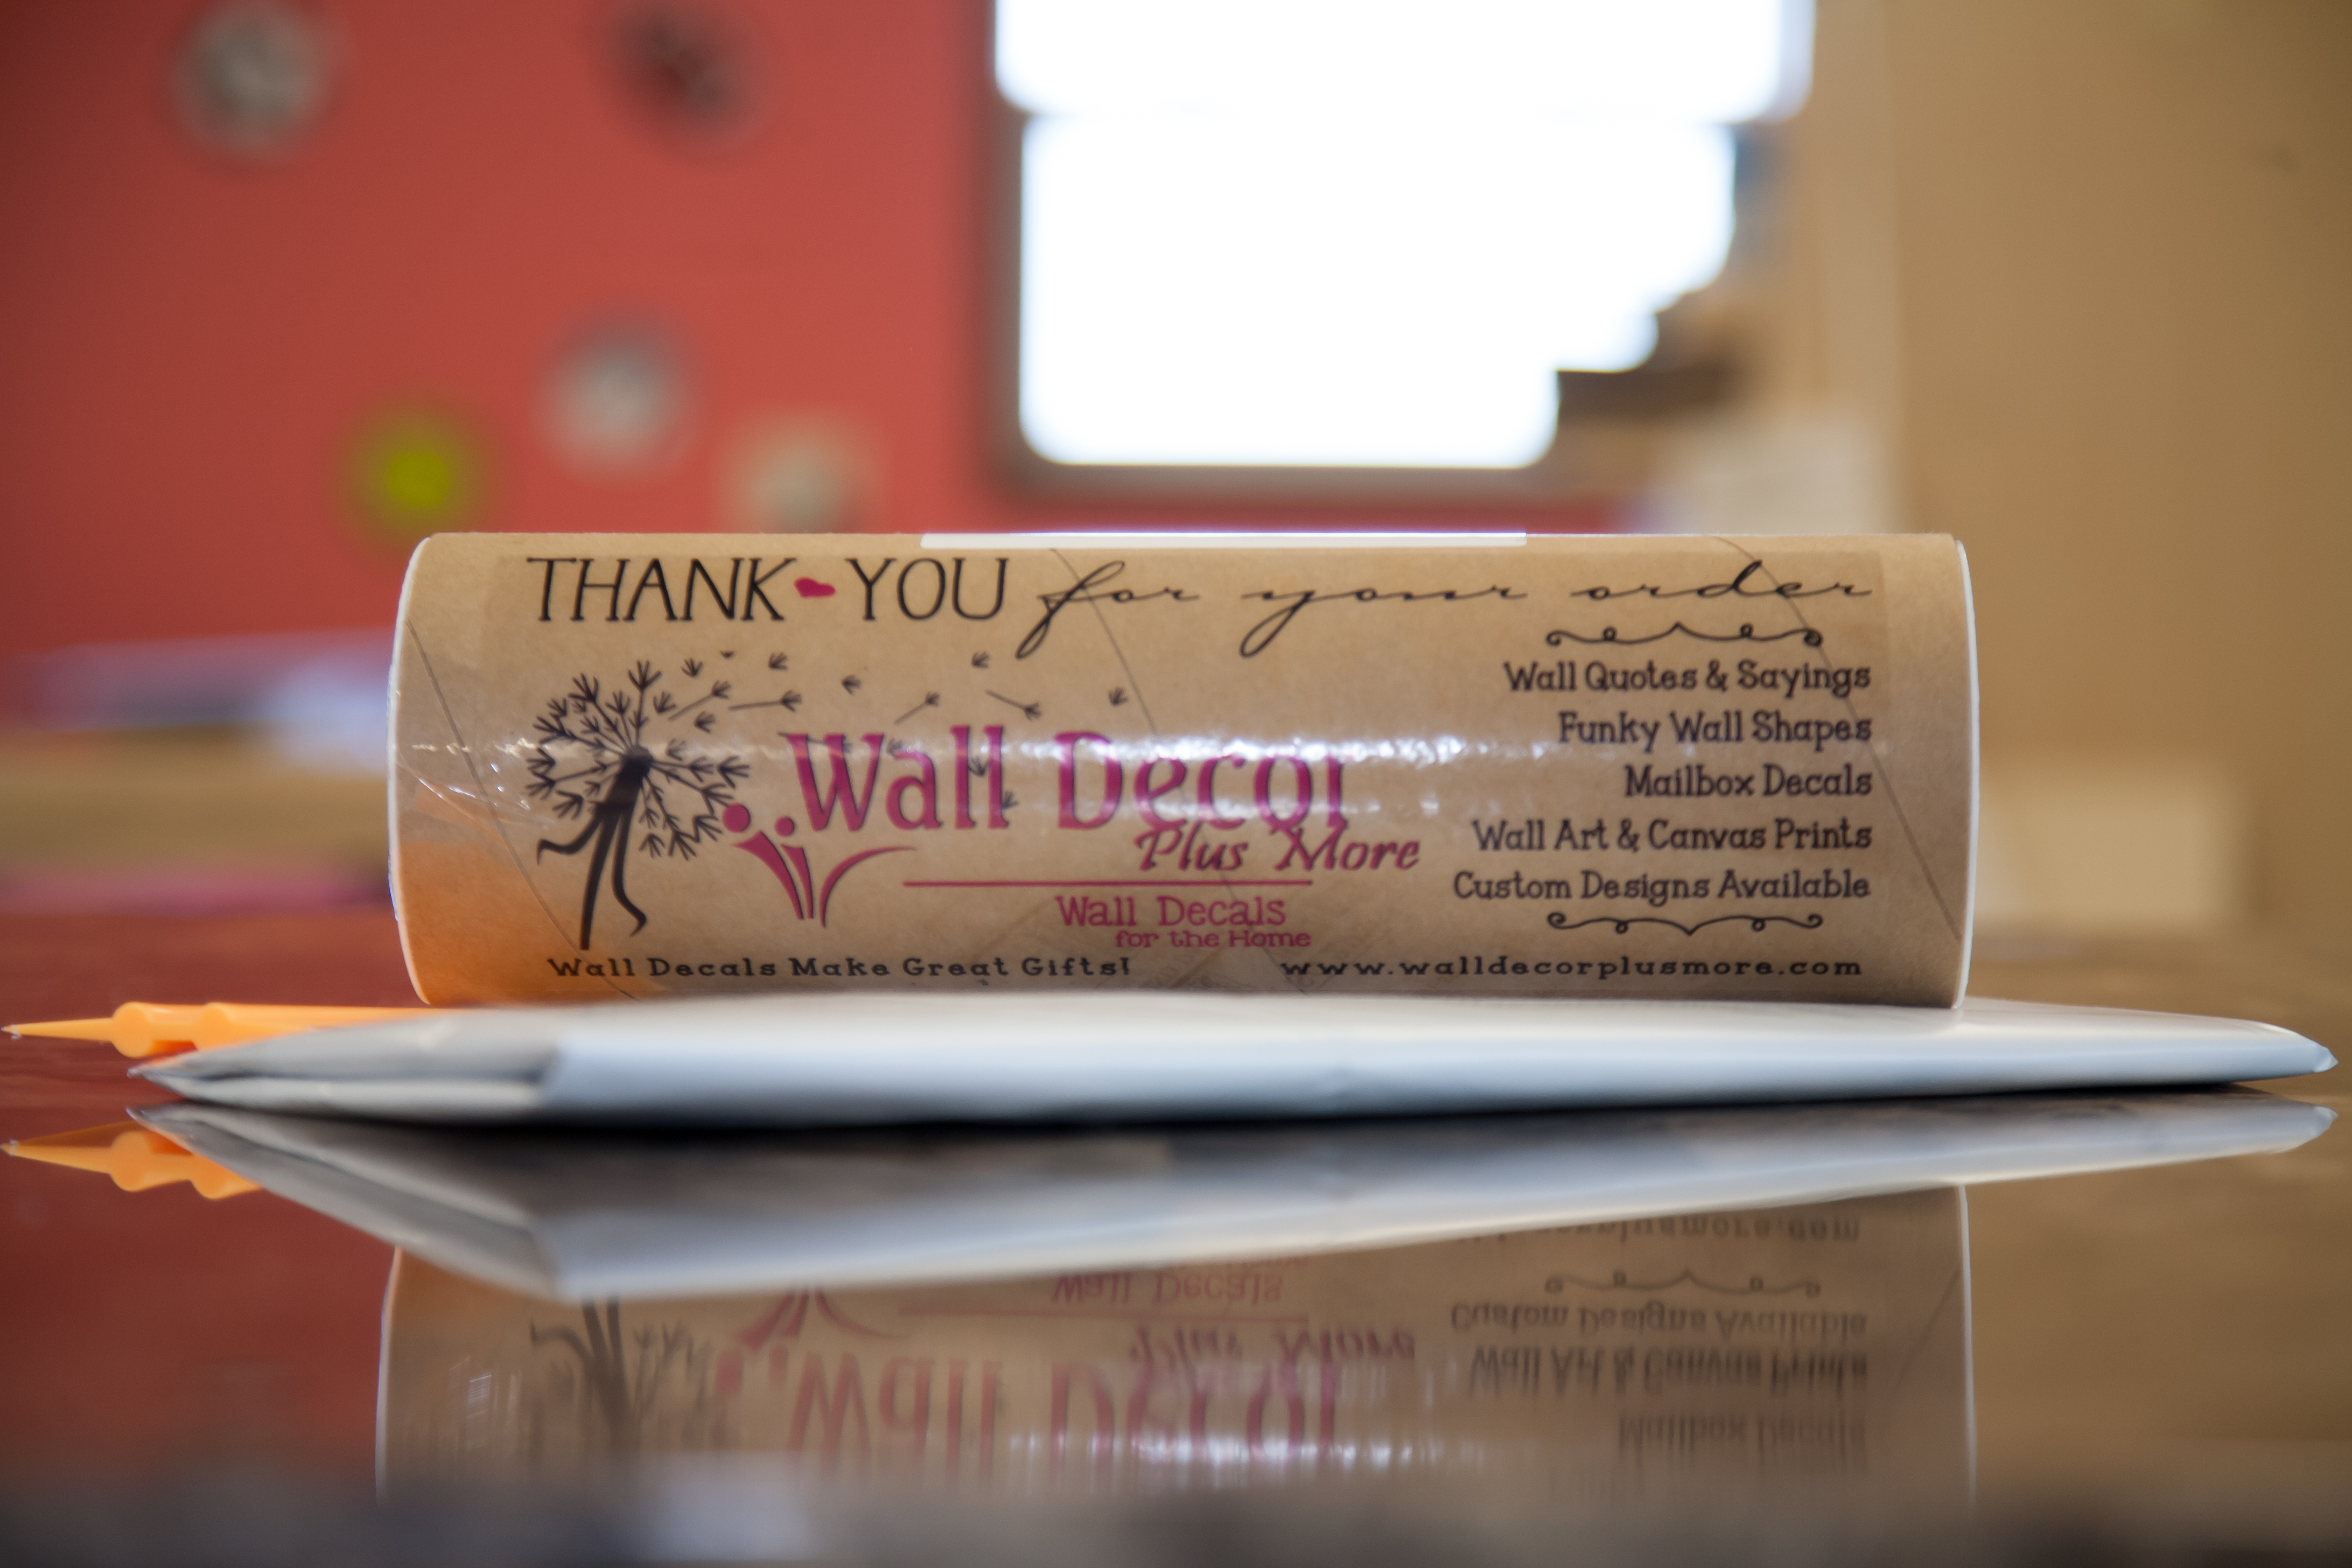 Wall Decor Plus More offers free domestic shipping on all orders! Shop today and look for our signature brown tubes and custom thank you labels.